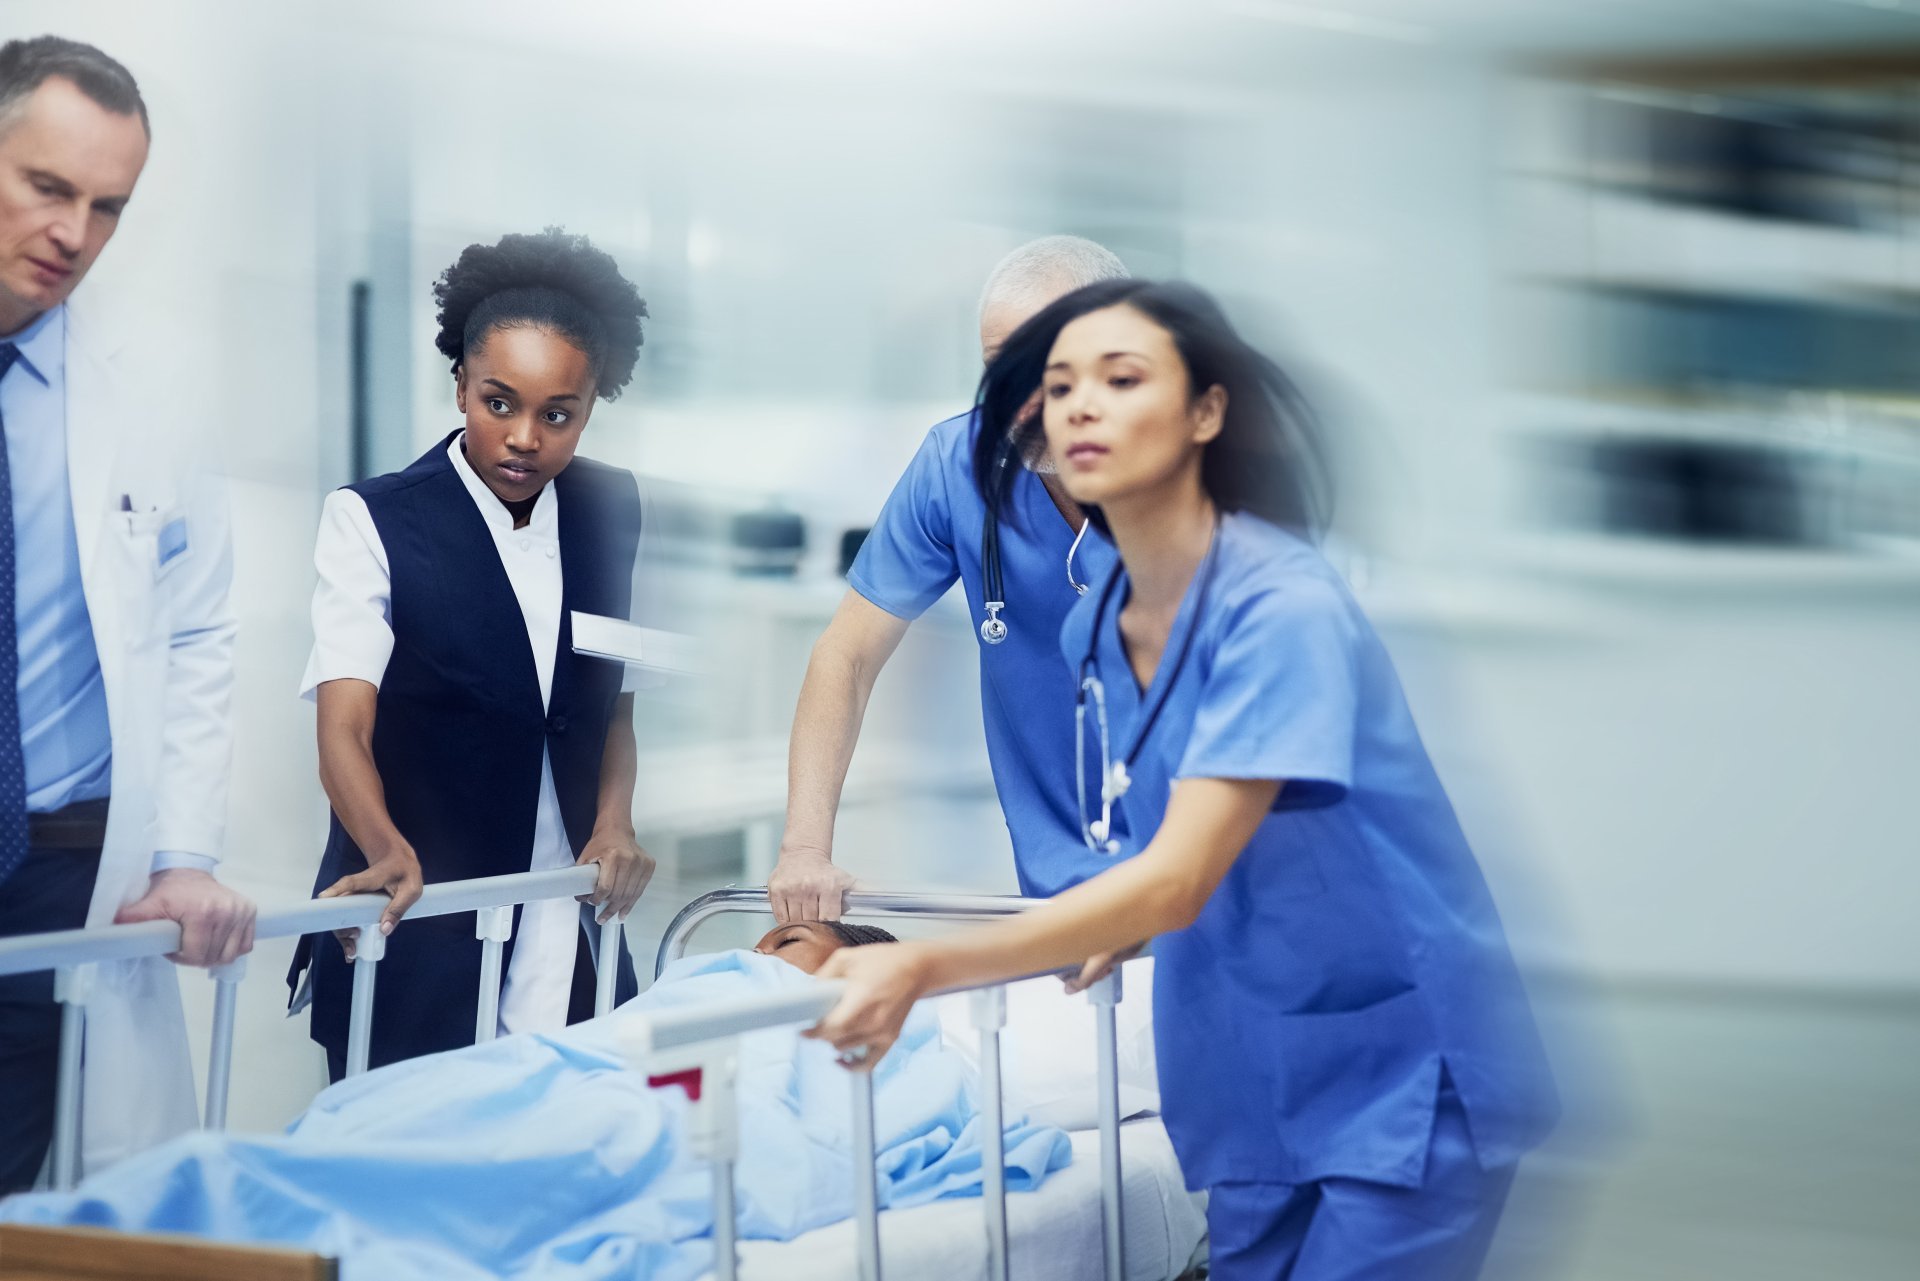 A group of medical professionals rushes a patient in a hospital bed to the operating room.